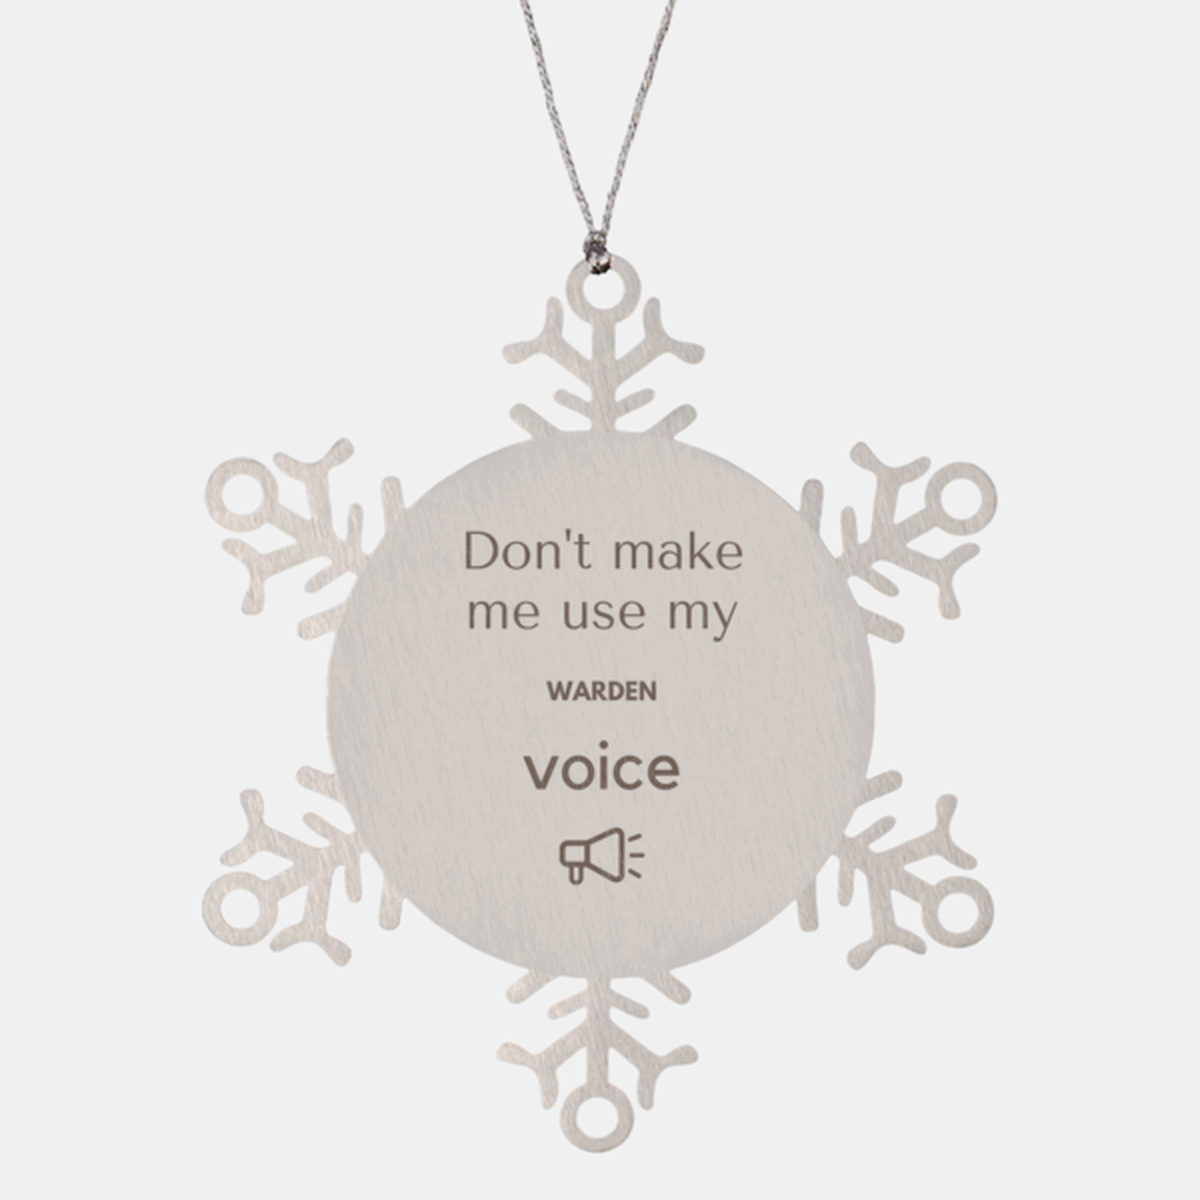 Don't make me use my Warden voice, Sarcasm Warden Ornament Gifts, Christmas Warden Snowflake Ornament Unique Gifts For Warden Coworkers, Men, Women, Colleague, Friends